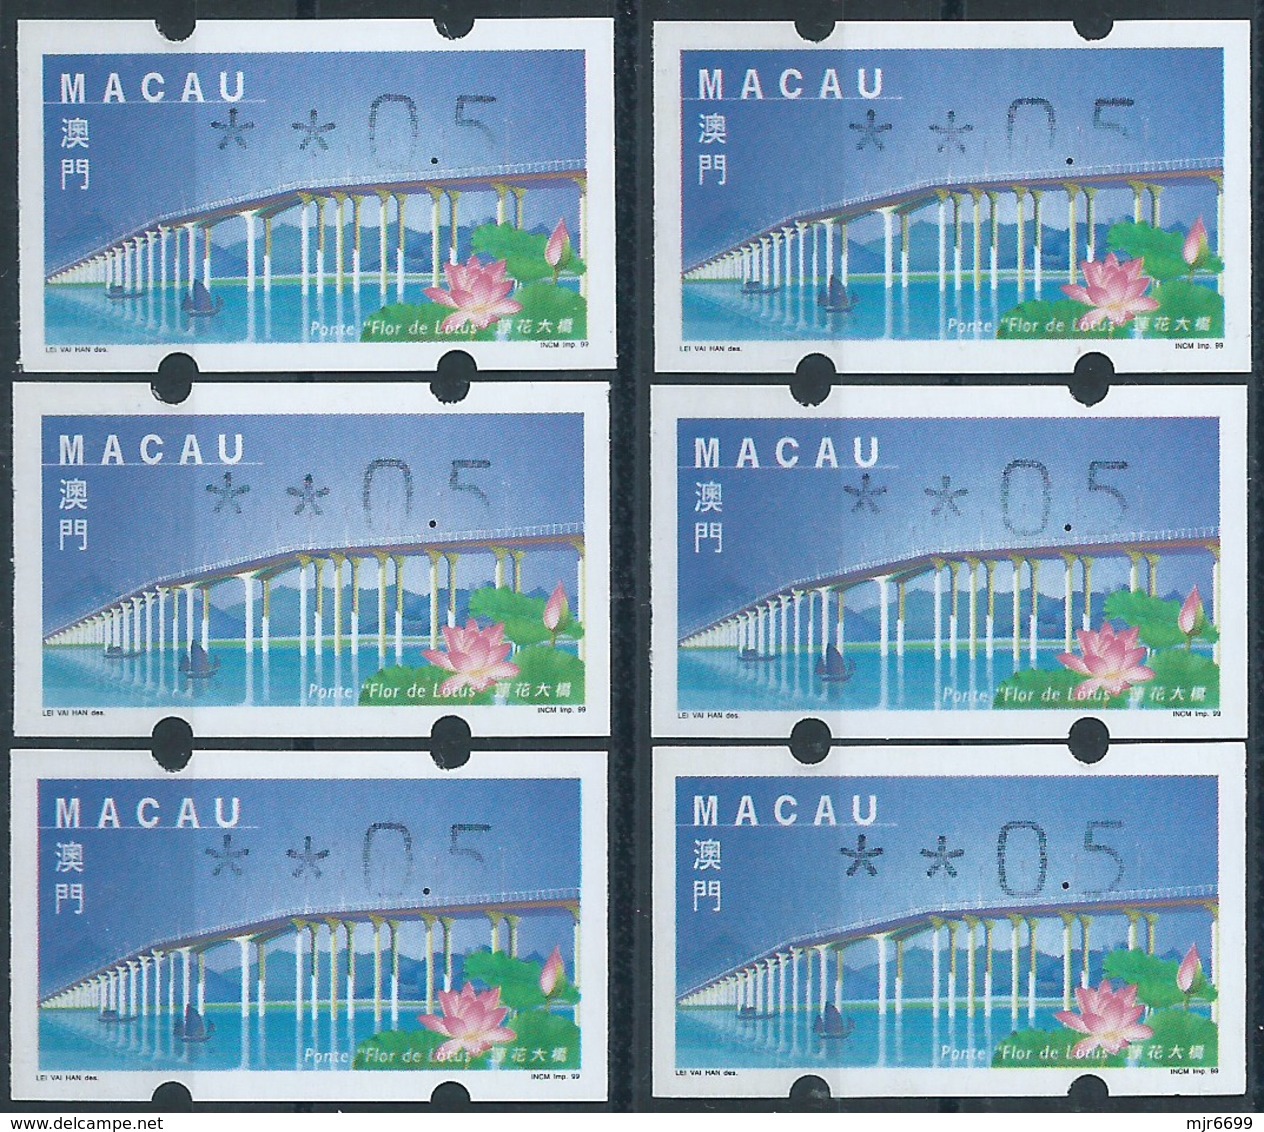 MACAU ATM LABELS, 1999 LOTUS FLOWER BRIDGE ISSUE, 50 AVOS WITH VALUE HALF PRINTED LOT OF 5 + 1 NORMAL FOR COMPARE - Distributeurs